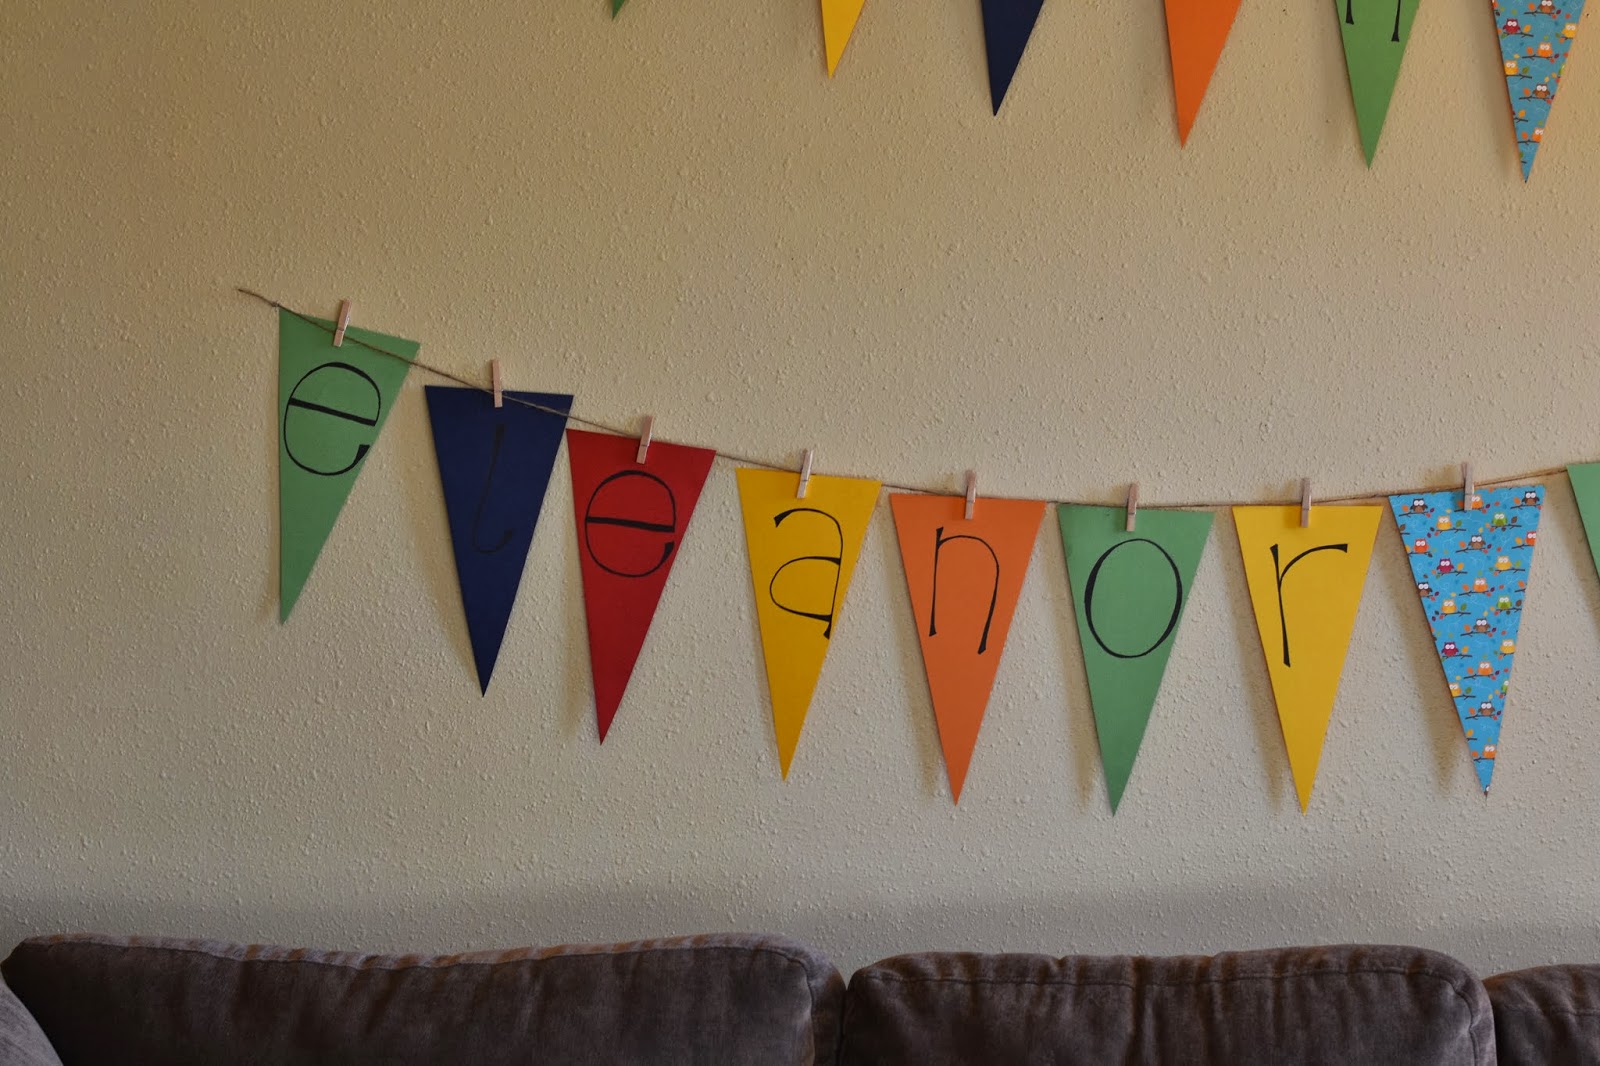 From Cup to Cup: easiest ever homemade birthday banner